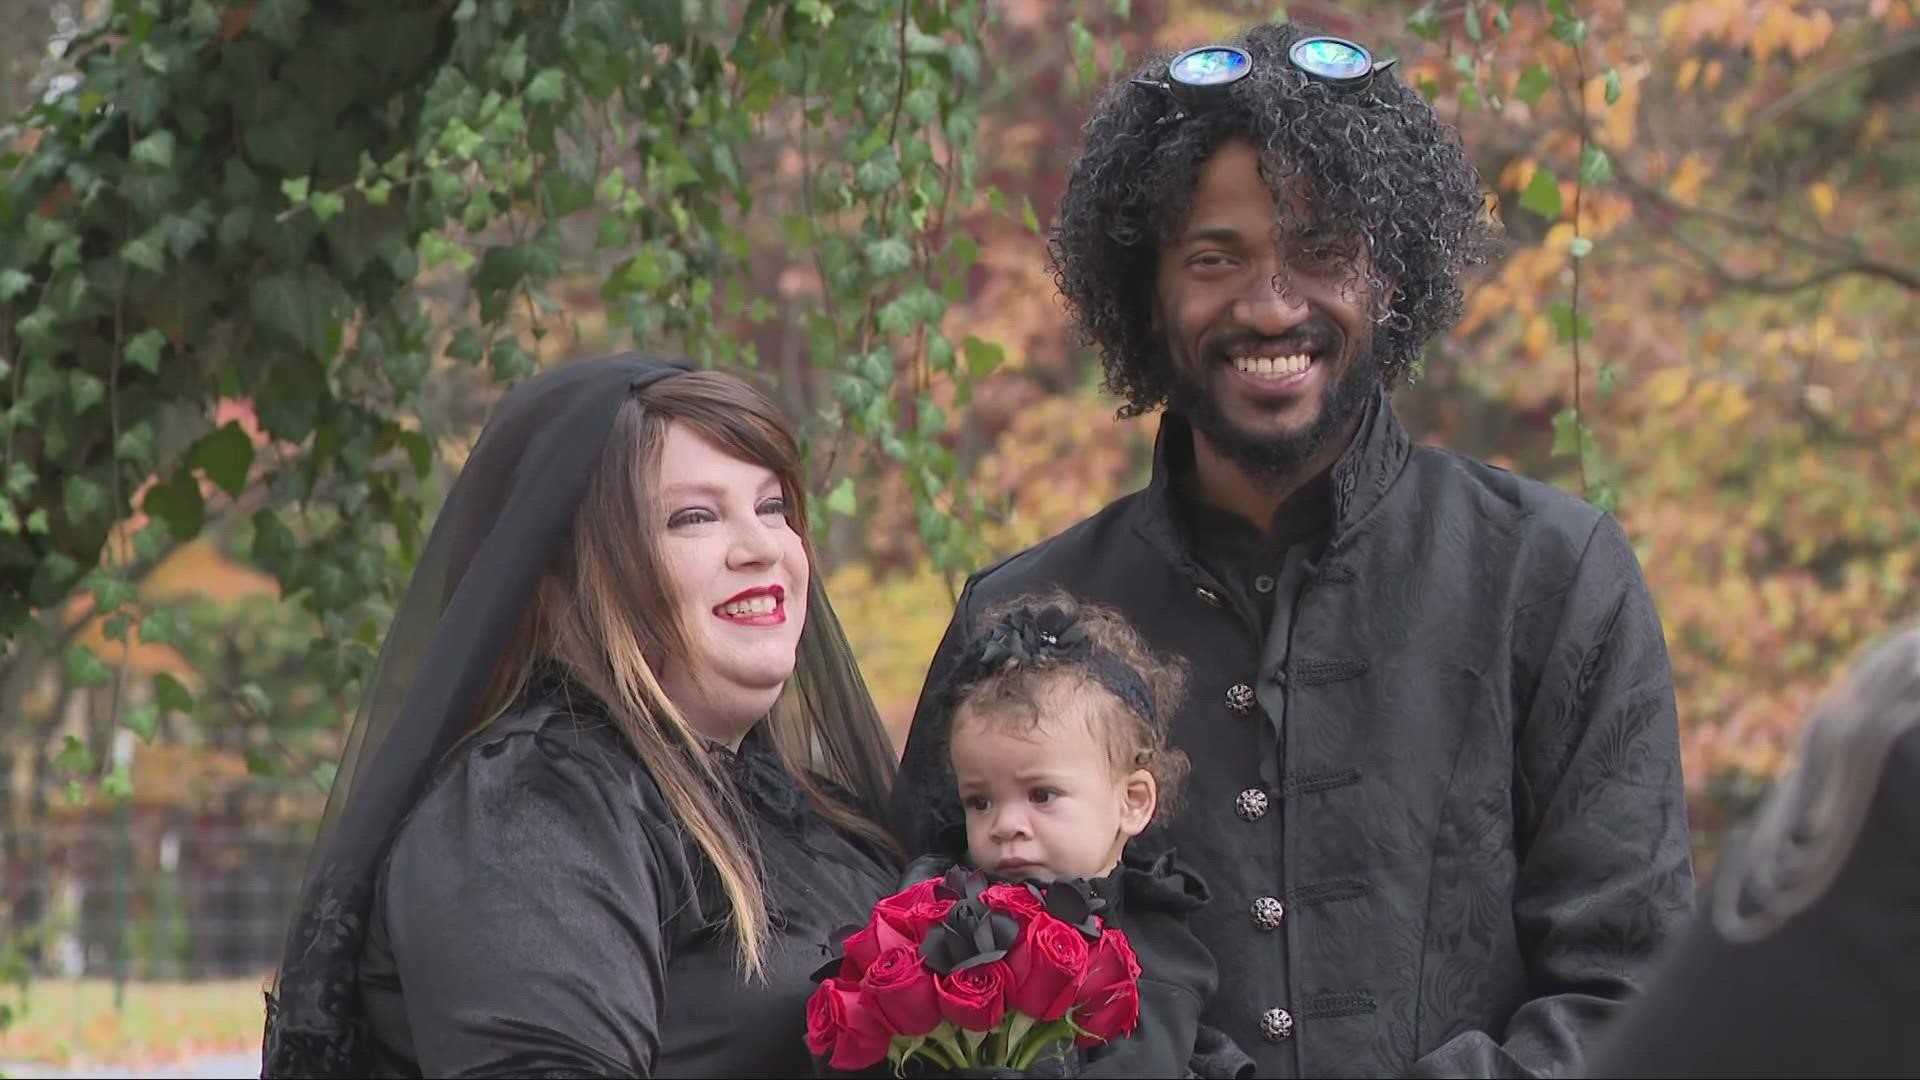 After being engaged for 15 years, Virginia and Jamal decided to finally tie the knot. They were married at Akron's Perkins Stone Mansion on Halloween.